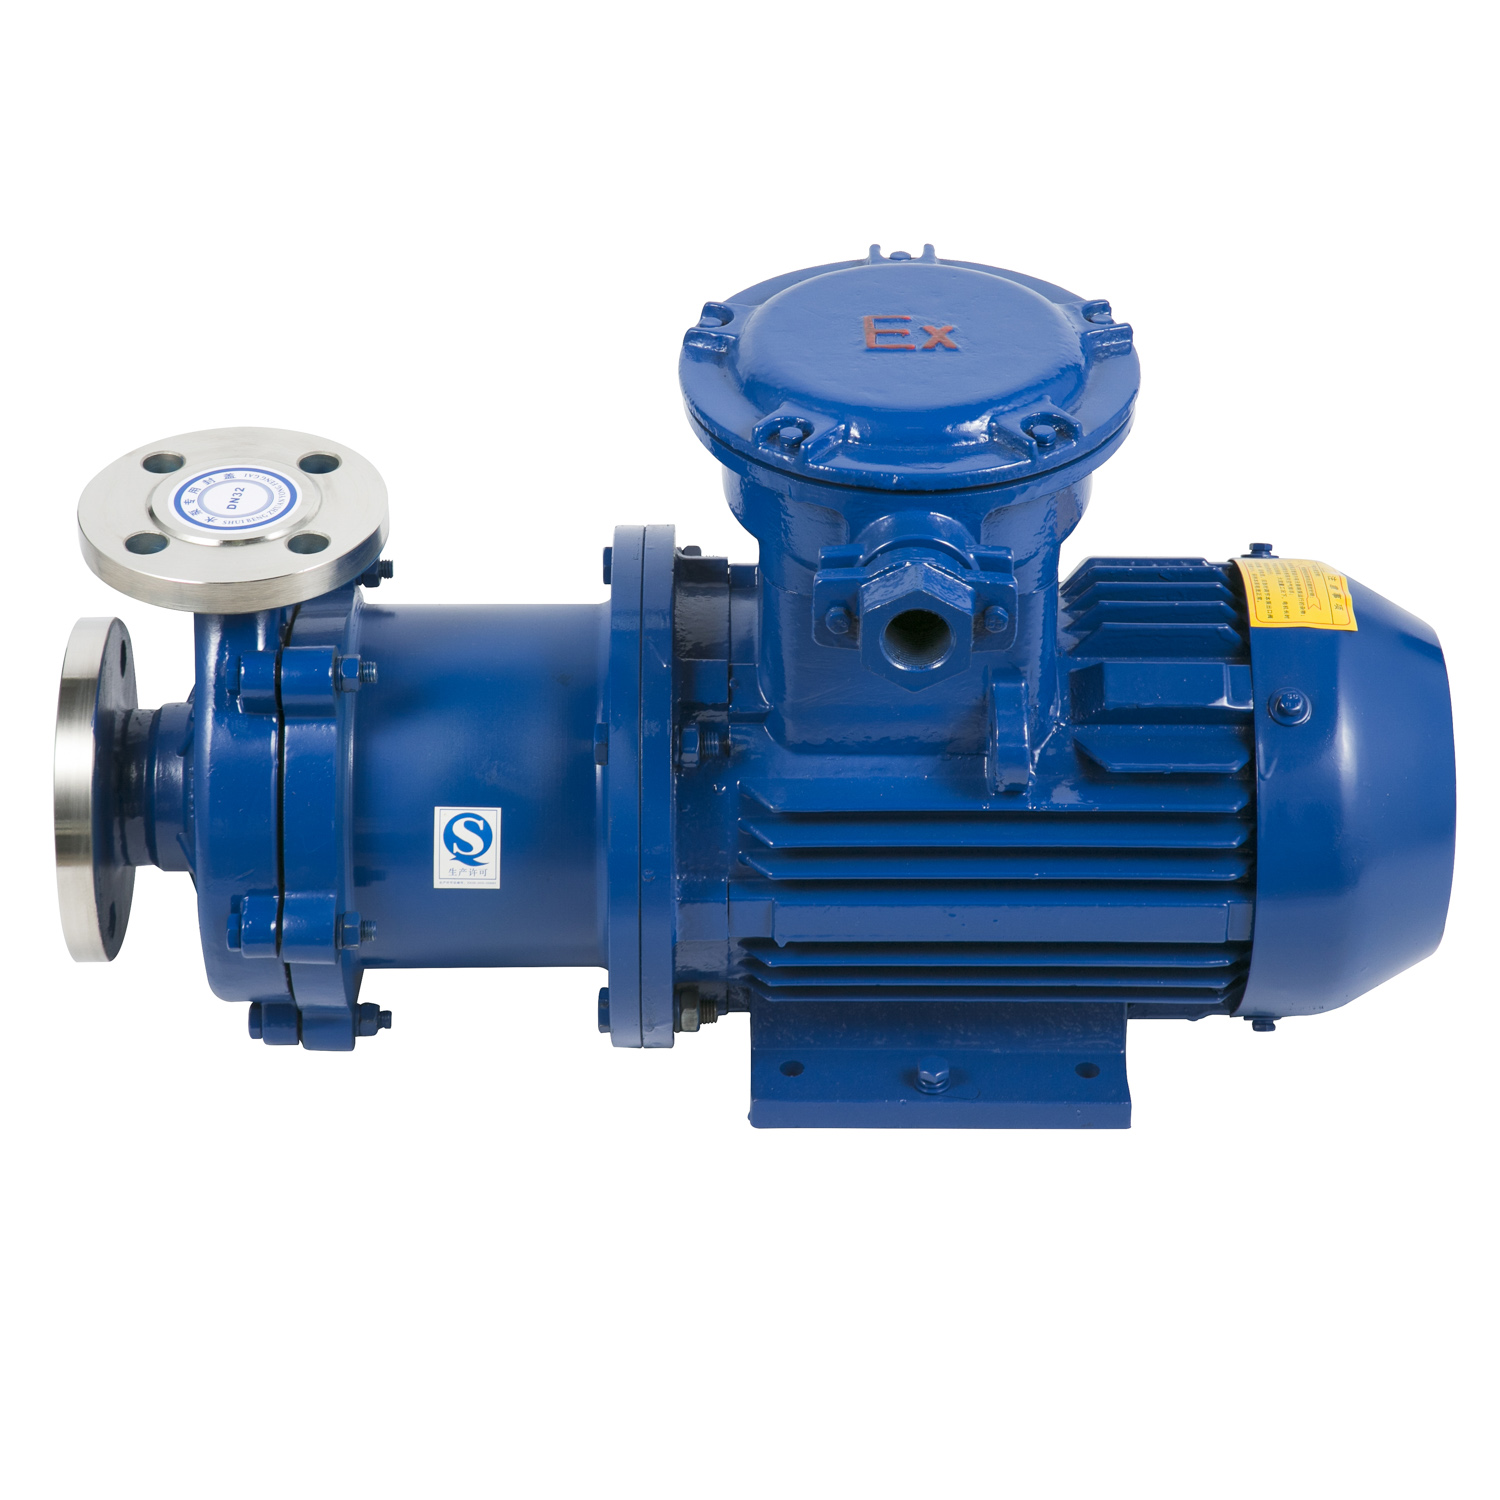 Horizontal Single Stage Sealless Magnetic Pump